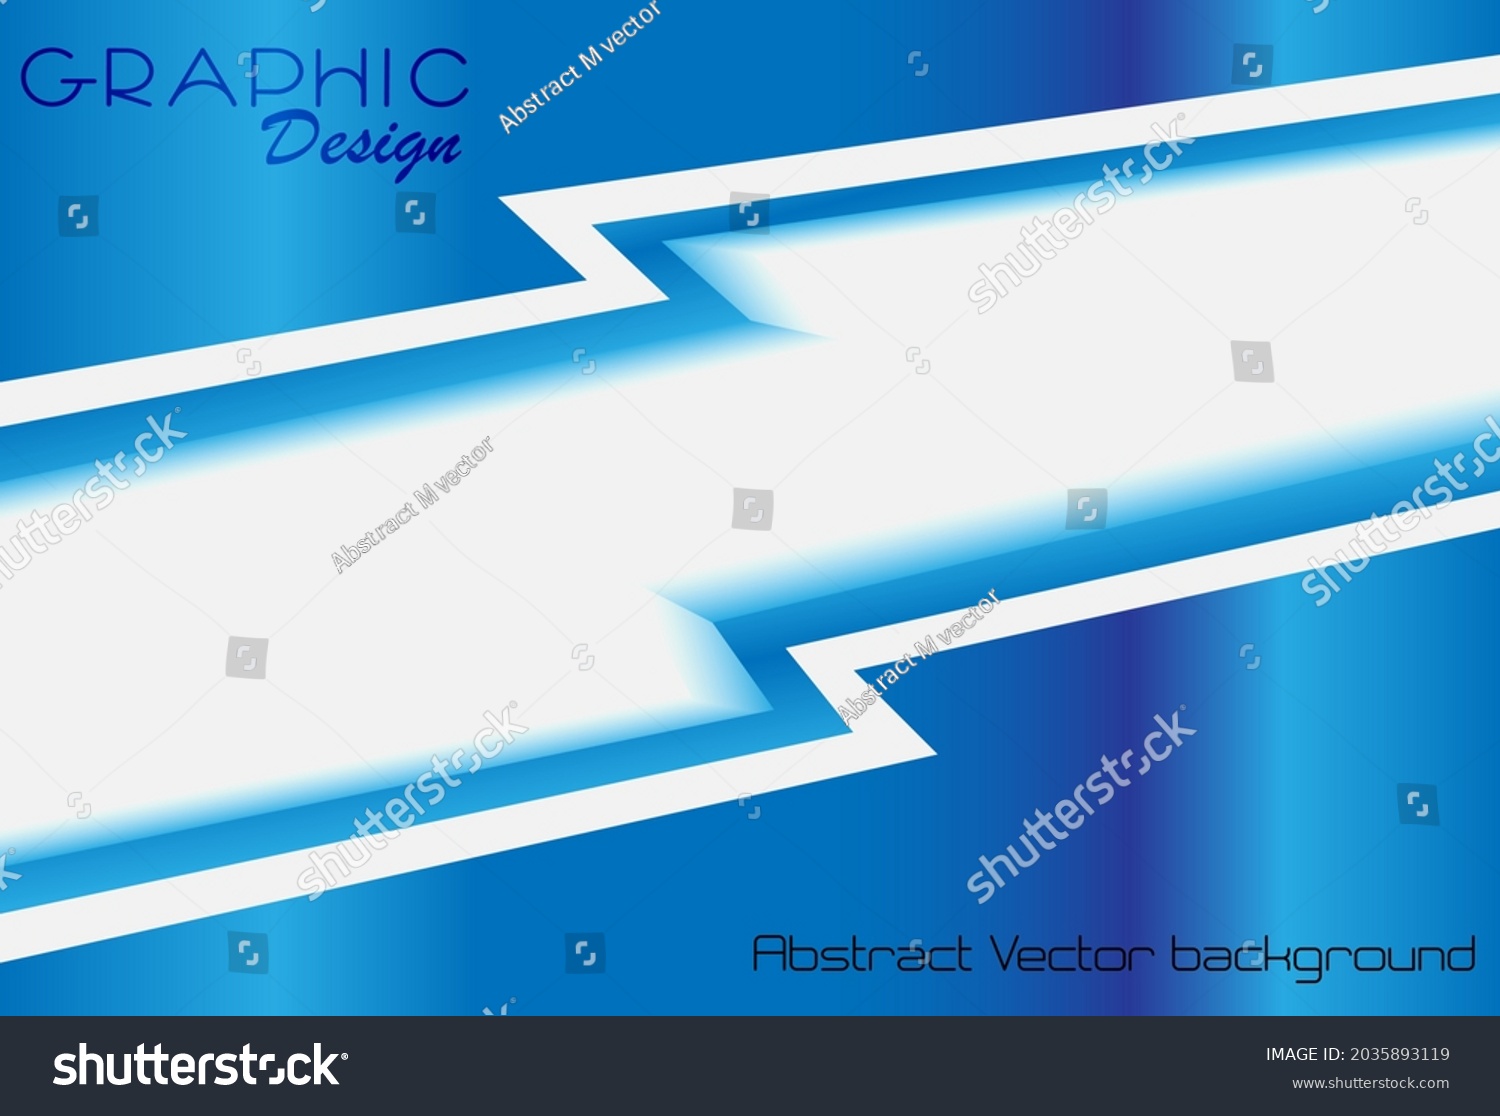 SVG of simple blue color abstract vector background design for anything svg